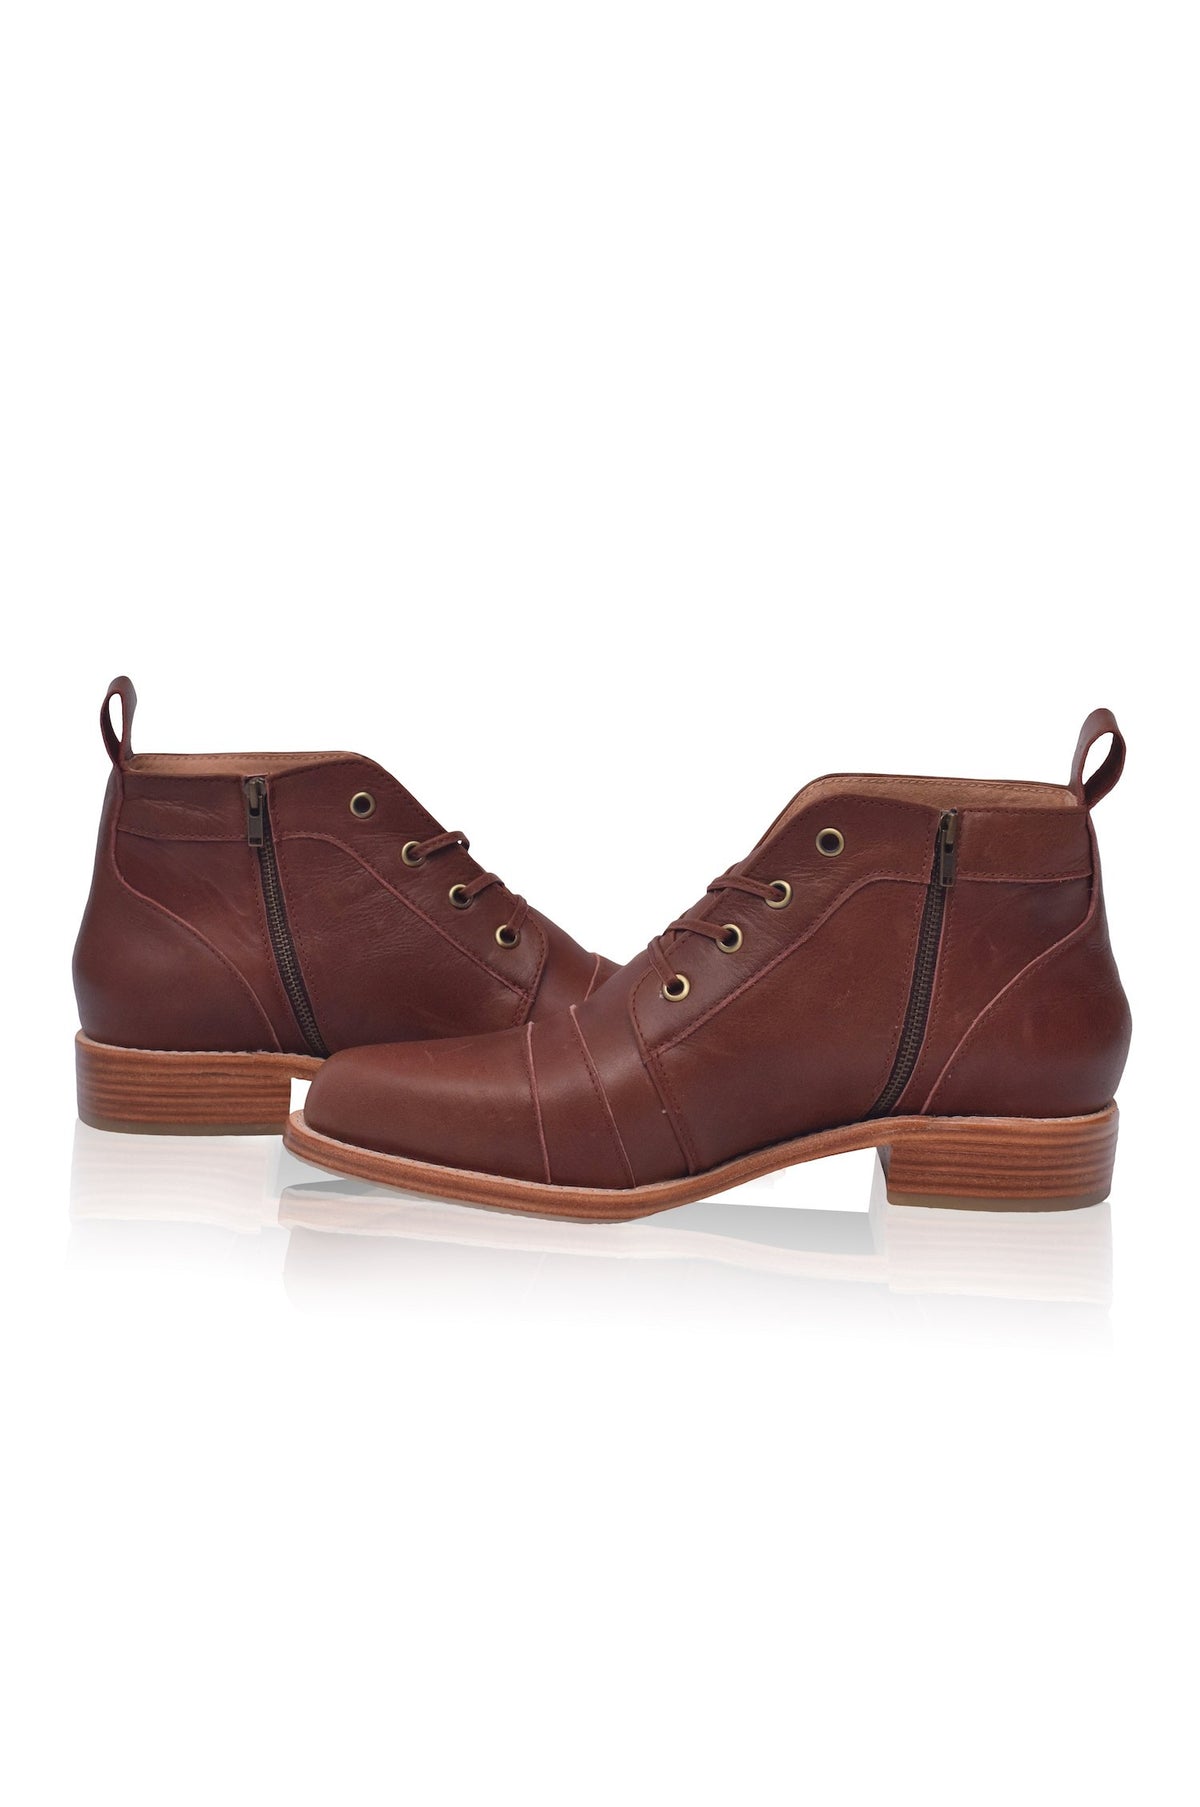 Passage Lace Up Boots by ELF - East Hills Casuals